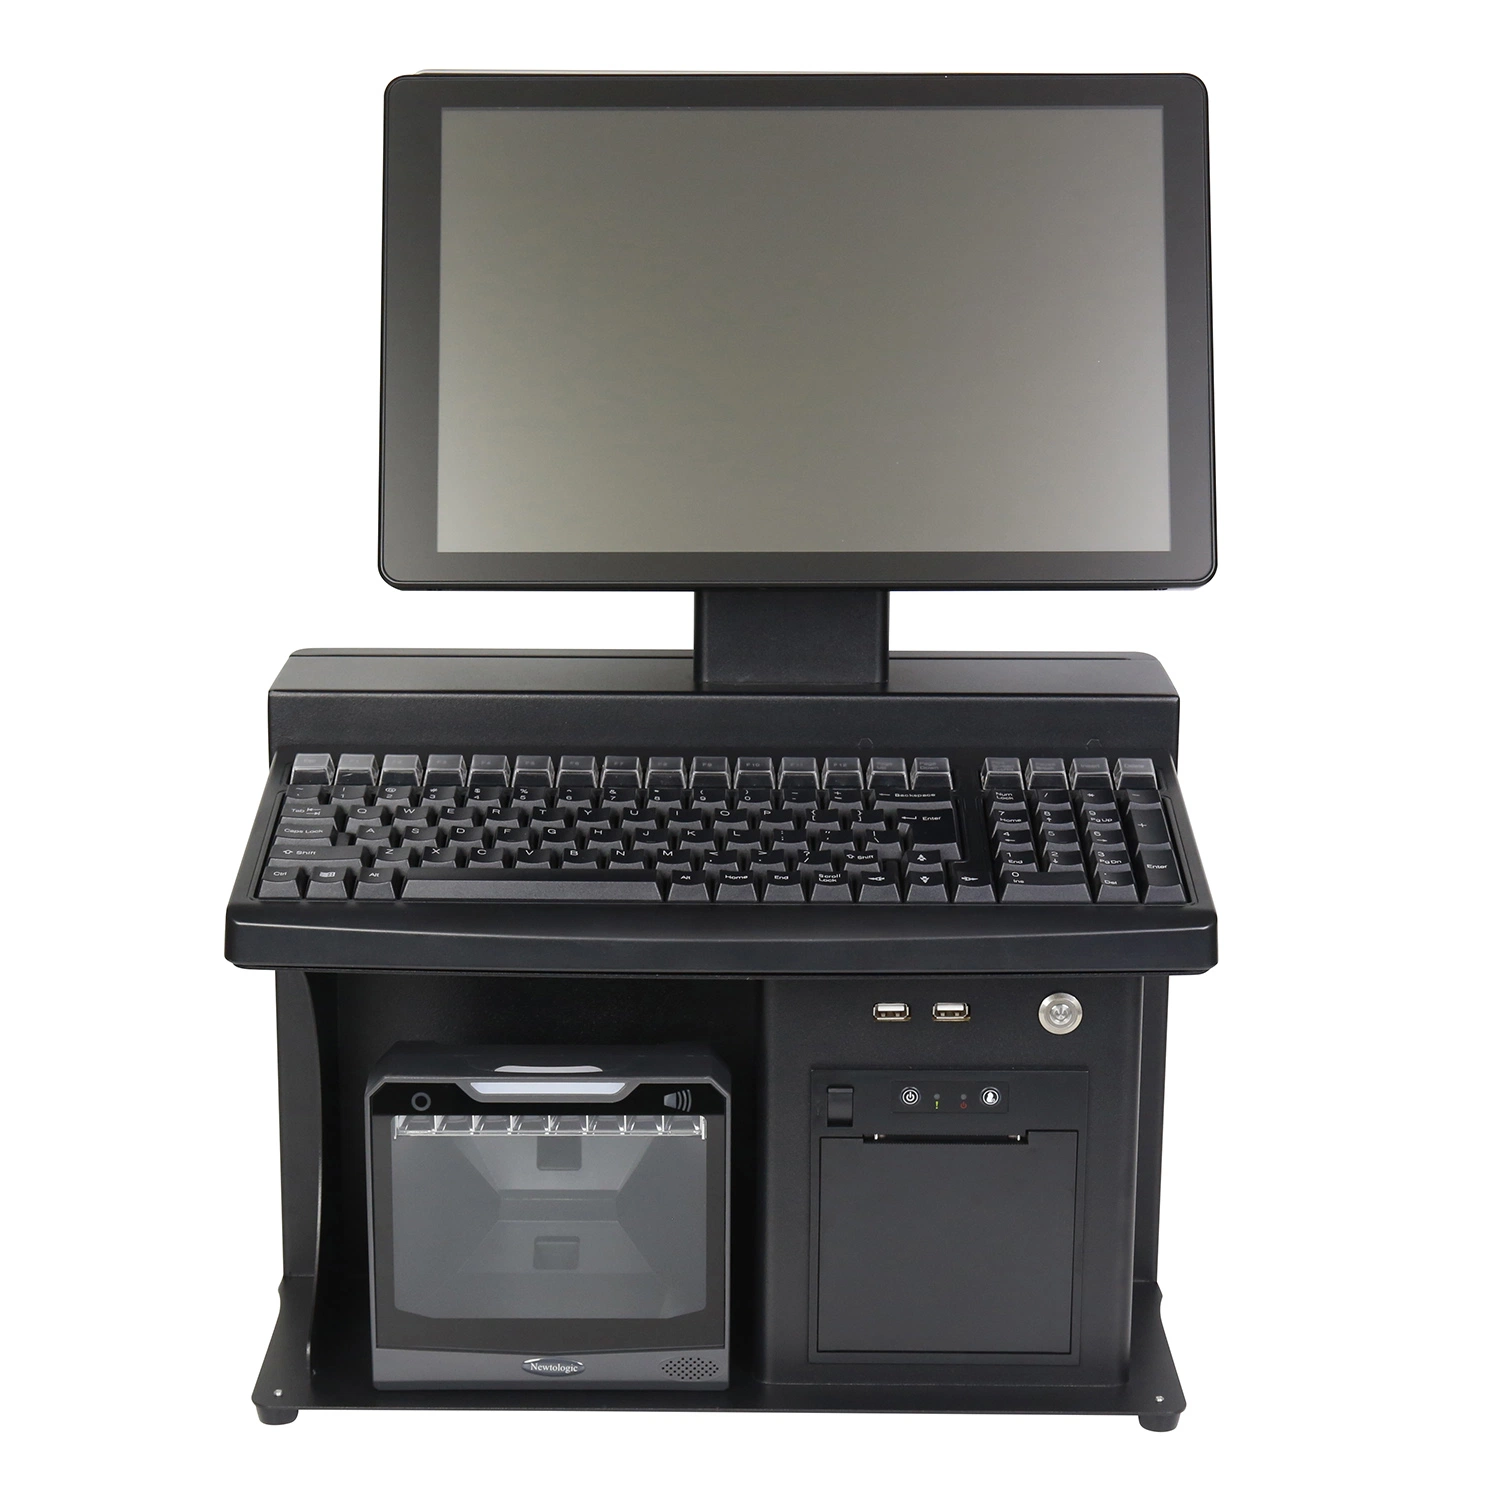 New 15.4 Inch Dual Screen POS System with 15.4 Inch 2ND Display